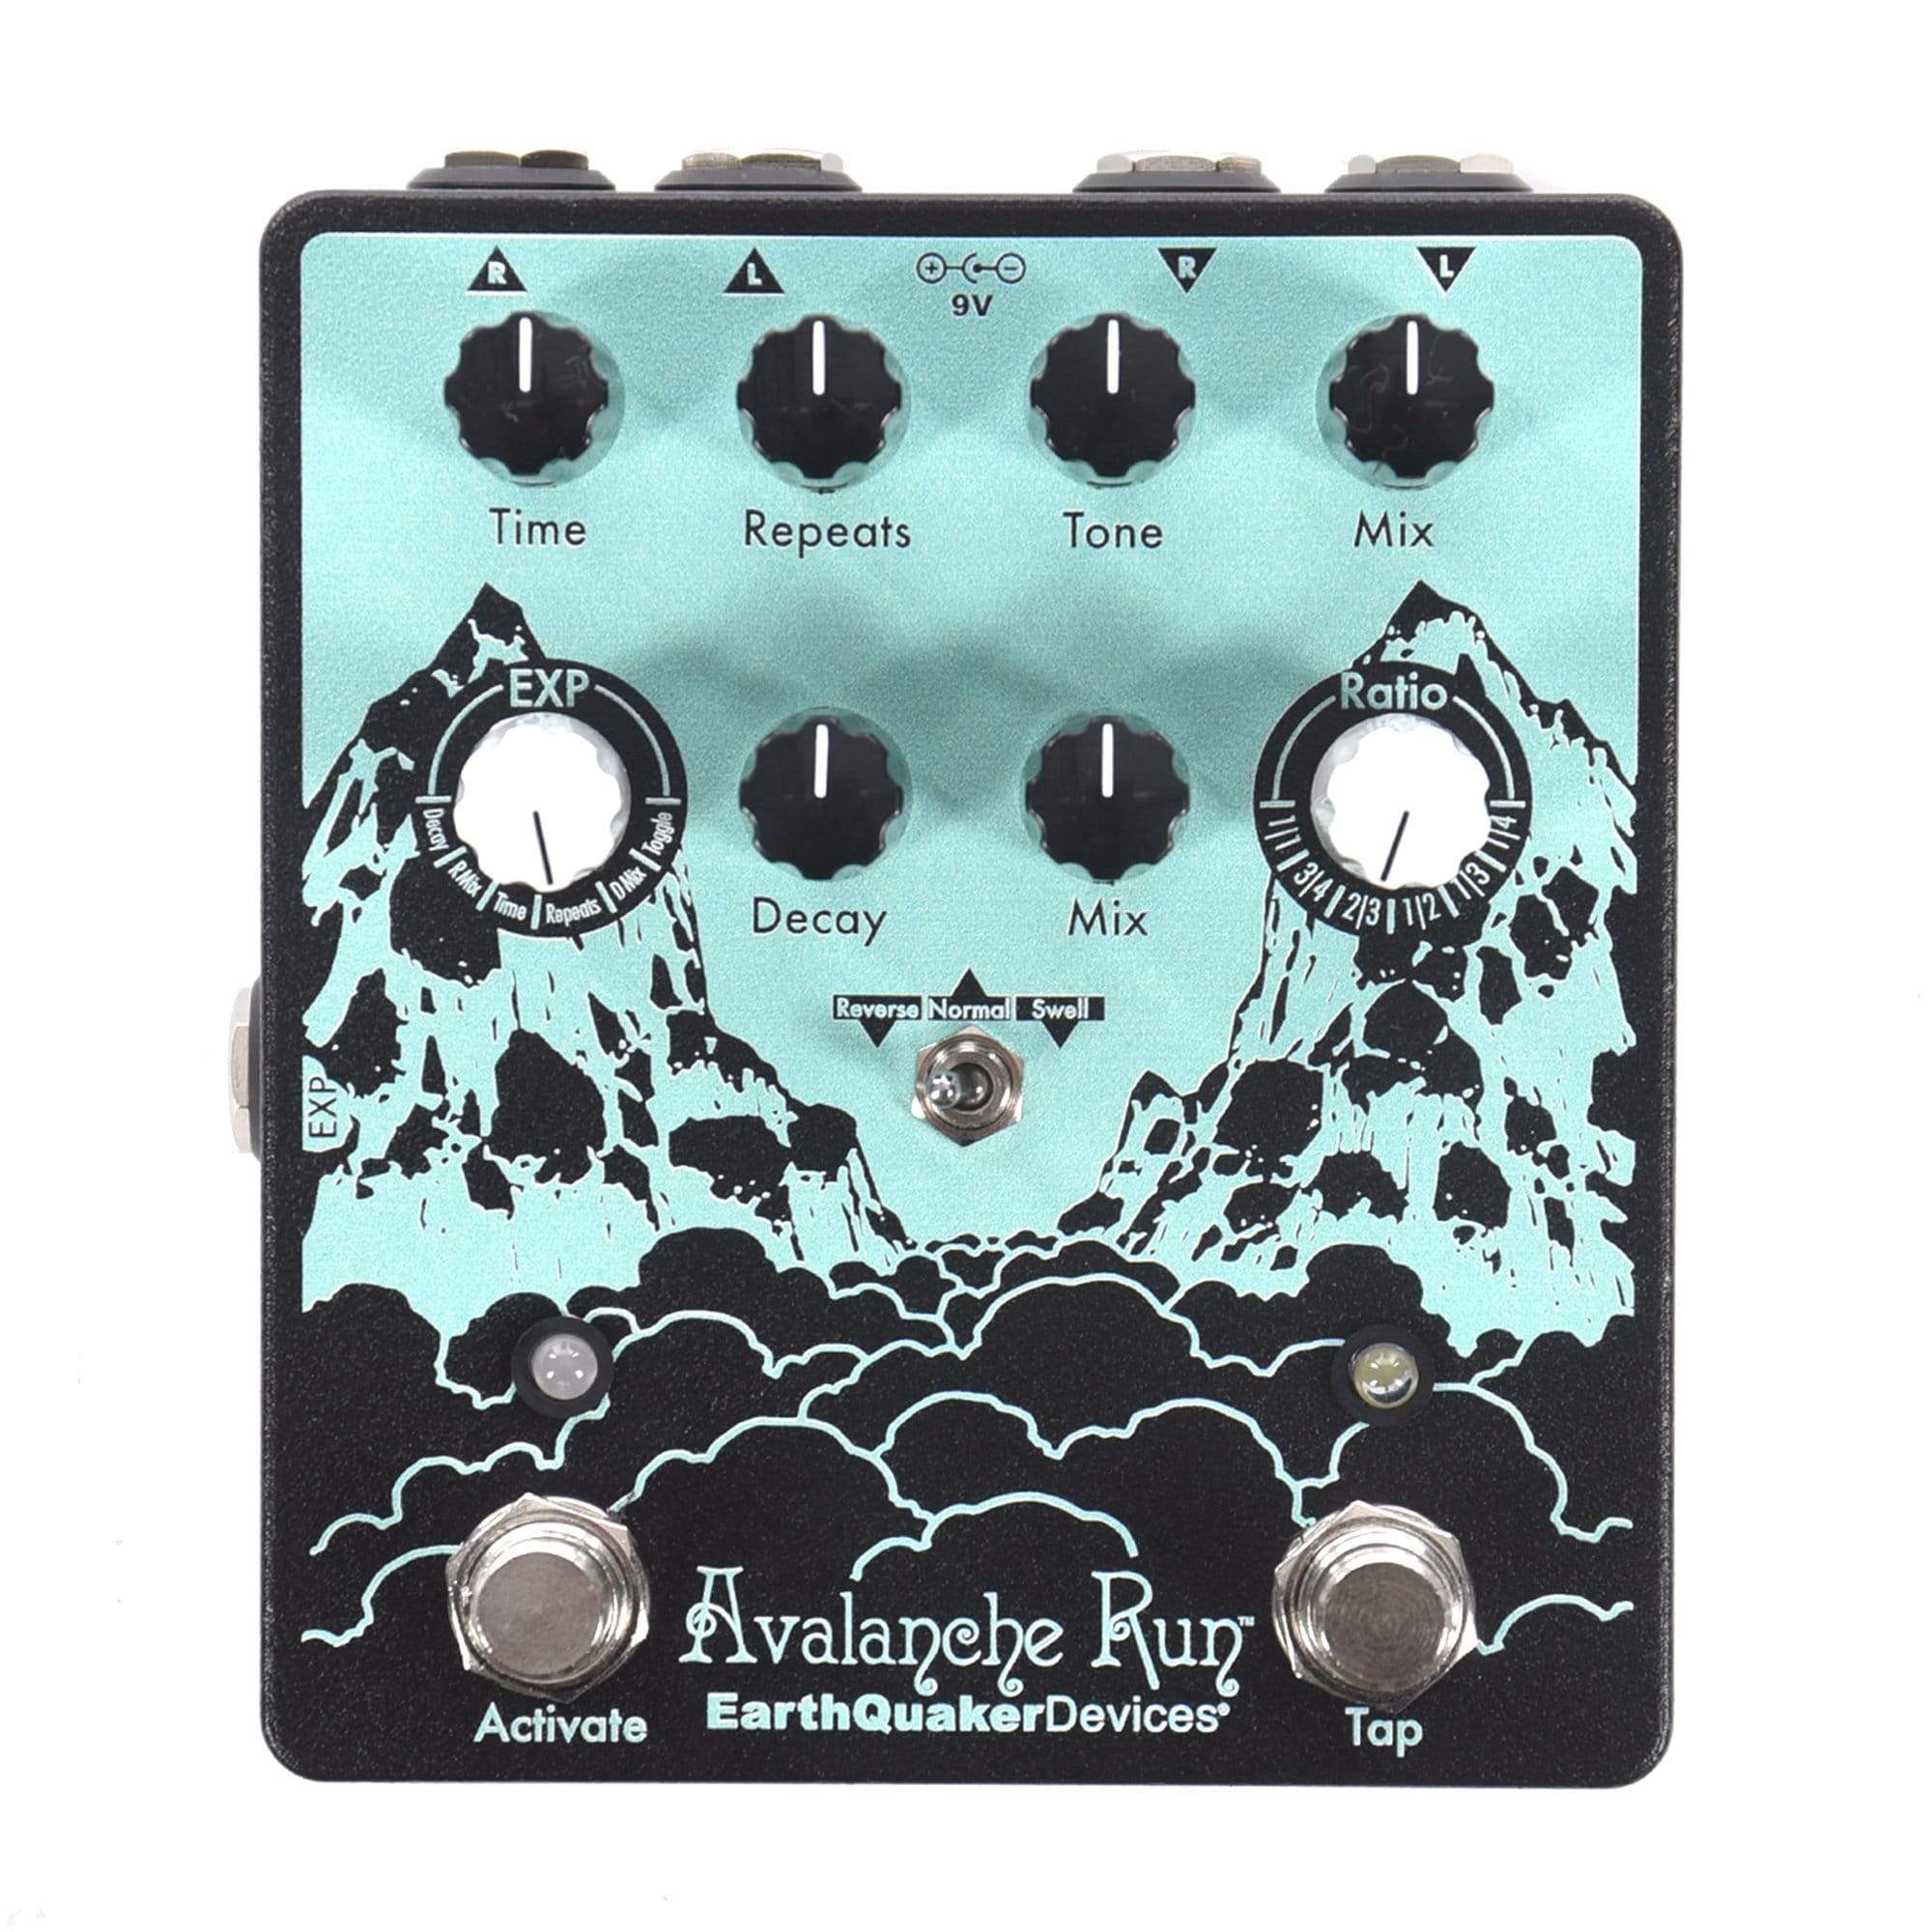 Earthquaker Devices Avalanche Run Stereo Delay & Reverb V2 Mint Green & Black Effects and Pedals / Delay